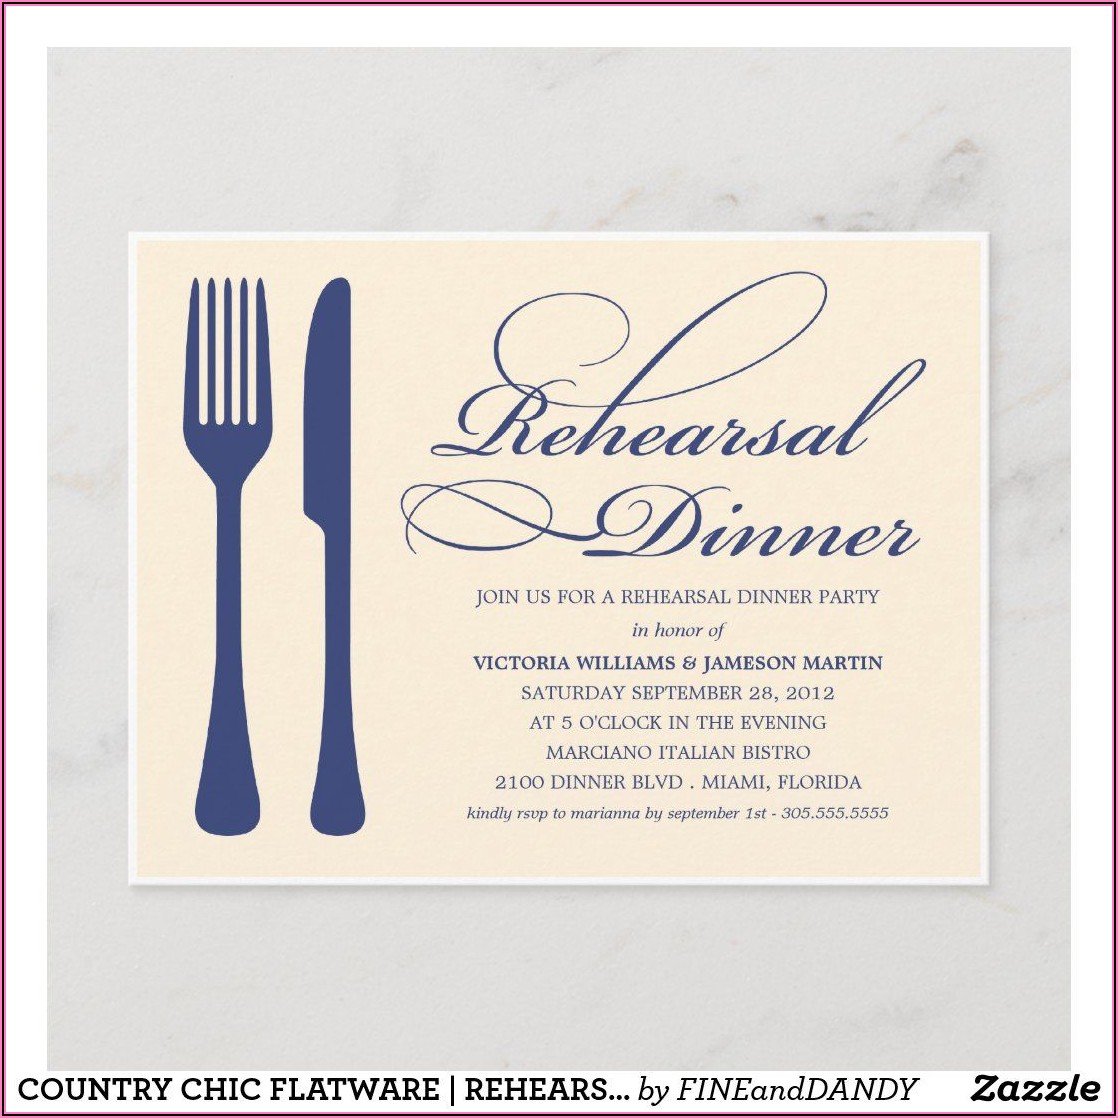 Personalized Rehearsal Dinner Invitations